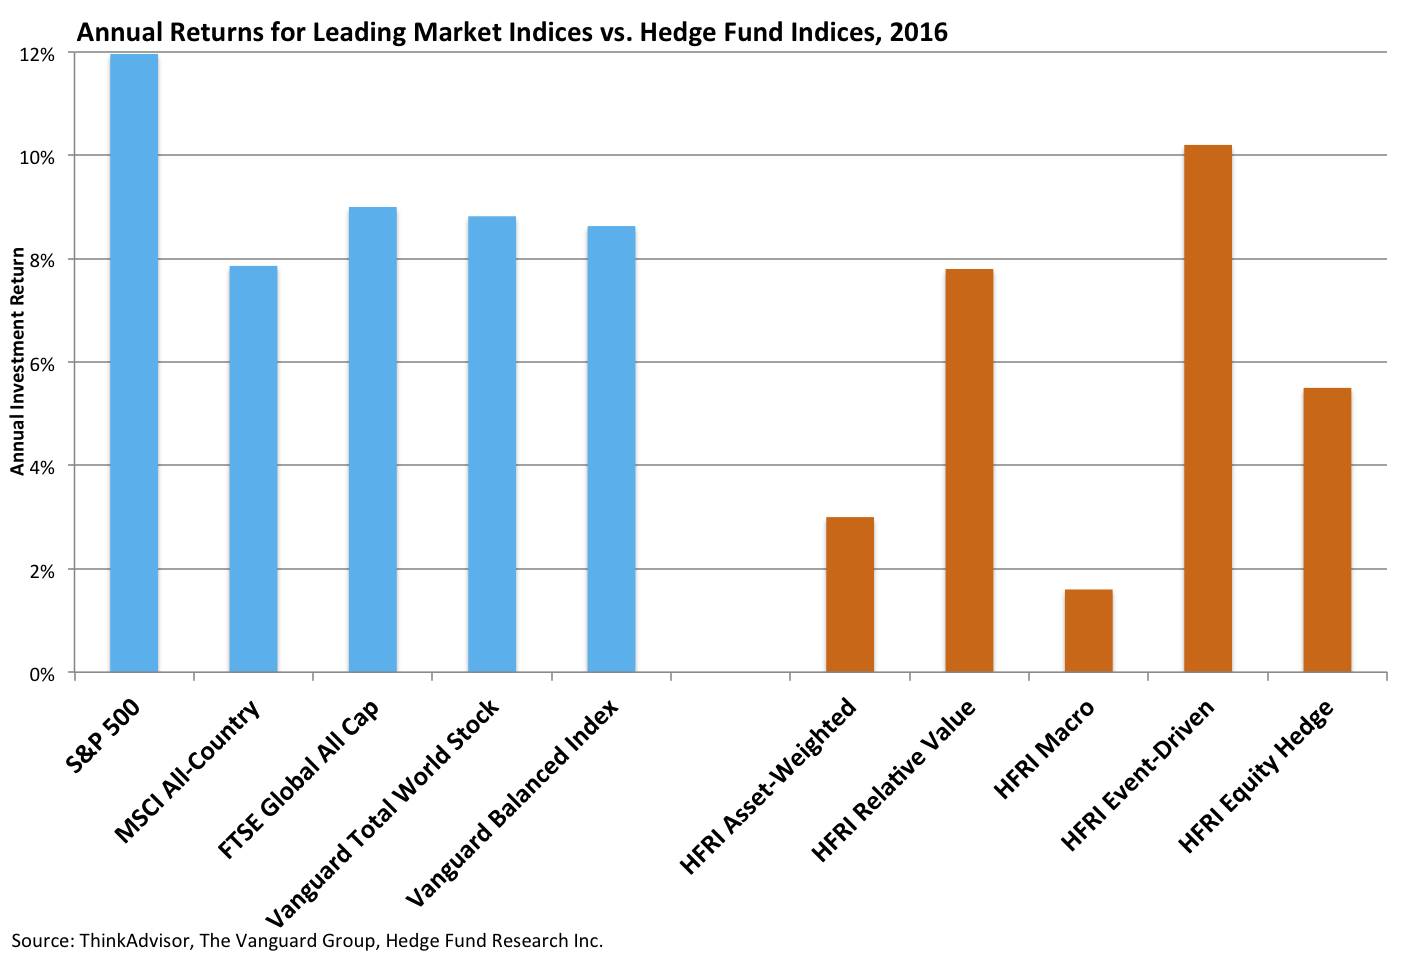 How many hedge funds are there?